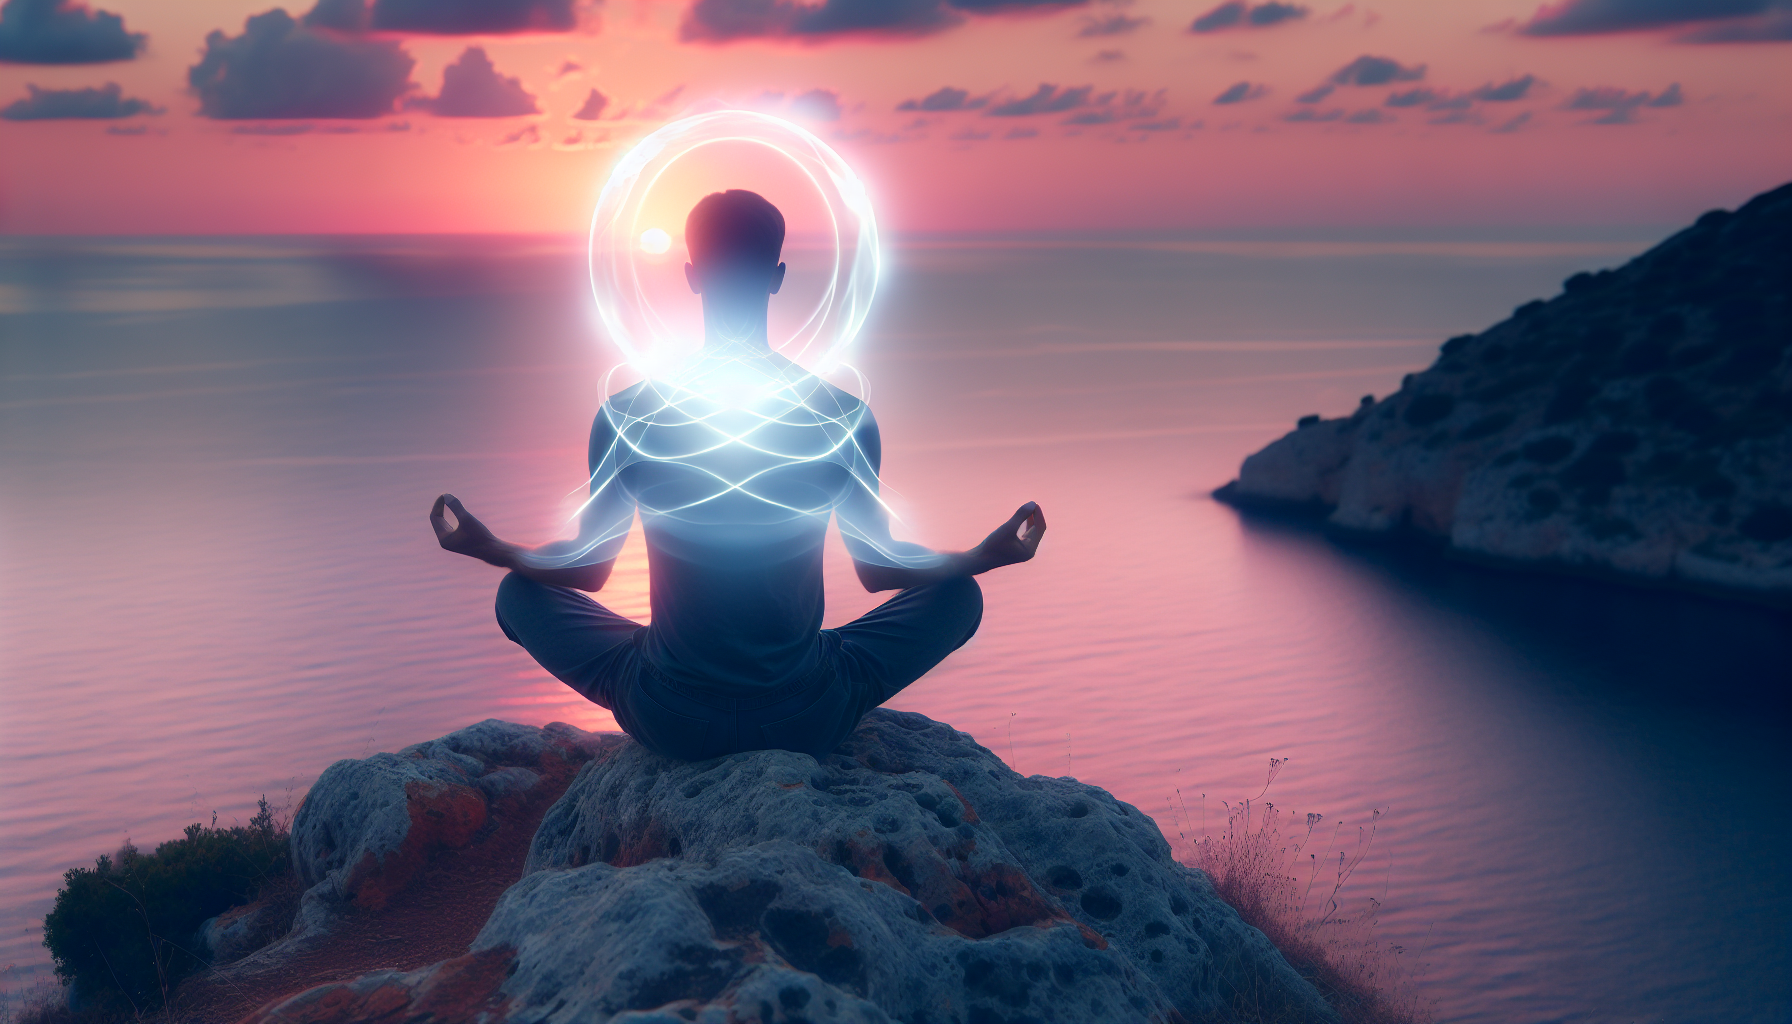 Meditating person surrounded by healing light